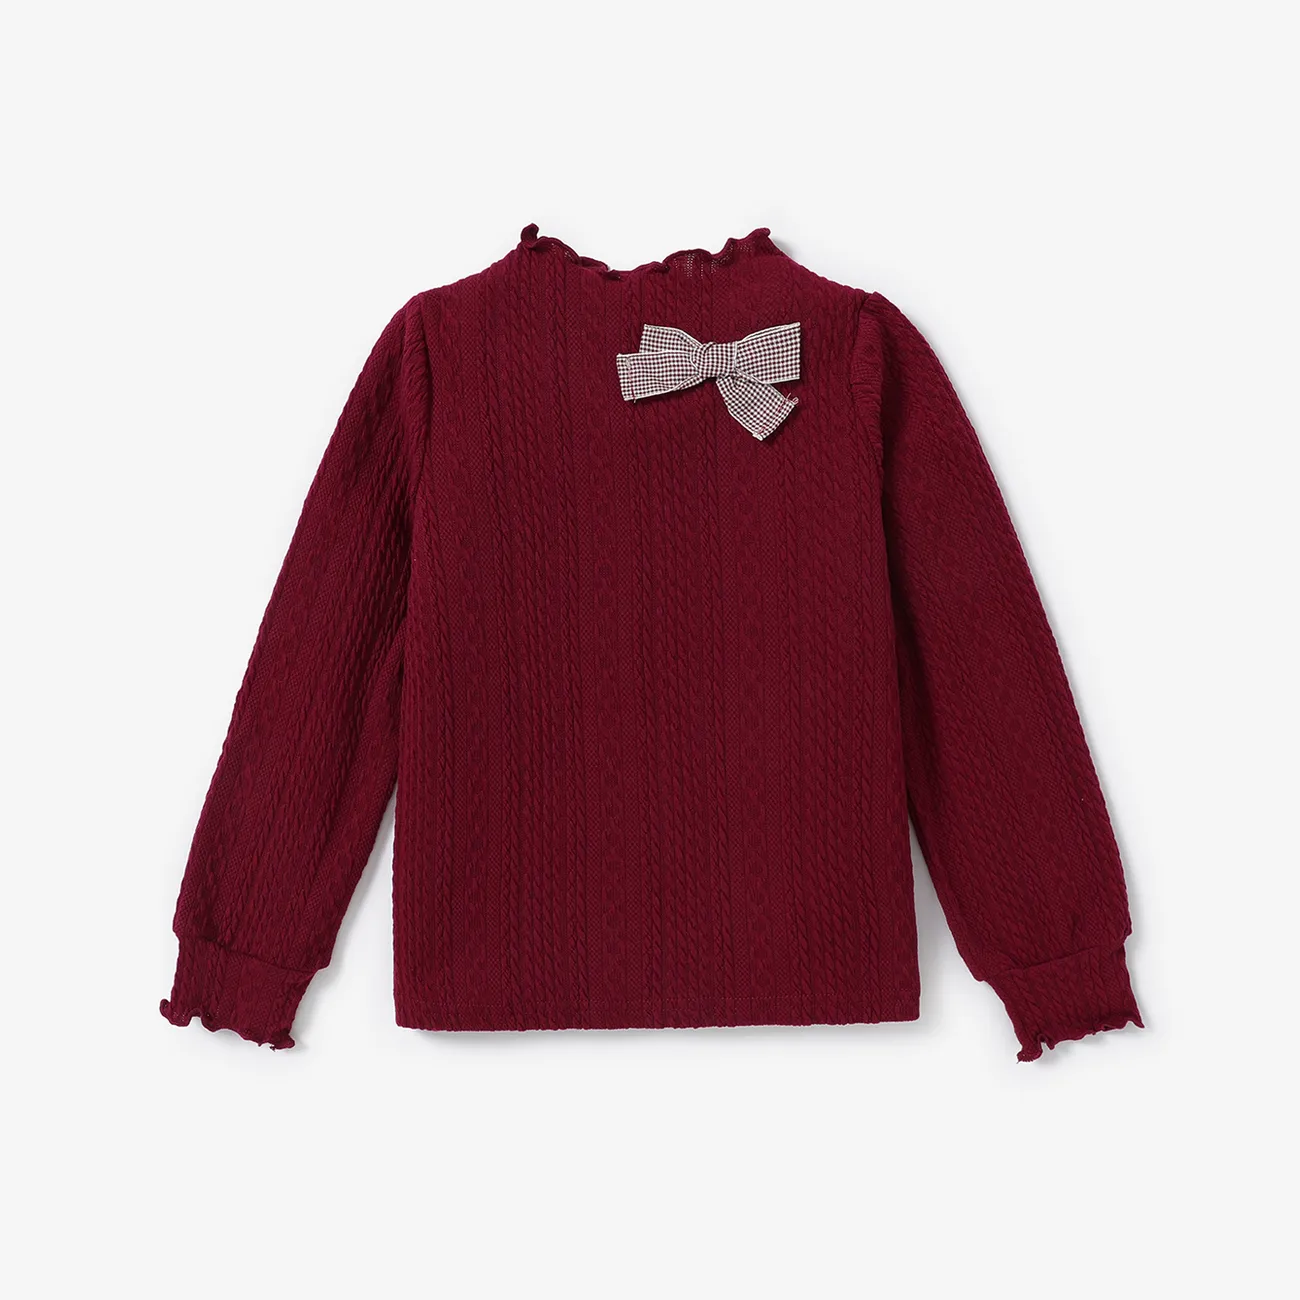 Kid Girl 3D Bowknot Design Cable Knit Textured Mock Neck Long-sleeve Tee Burgundy big image 1